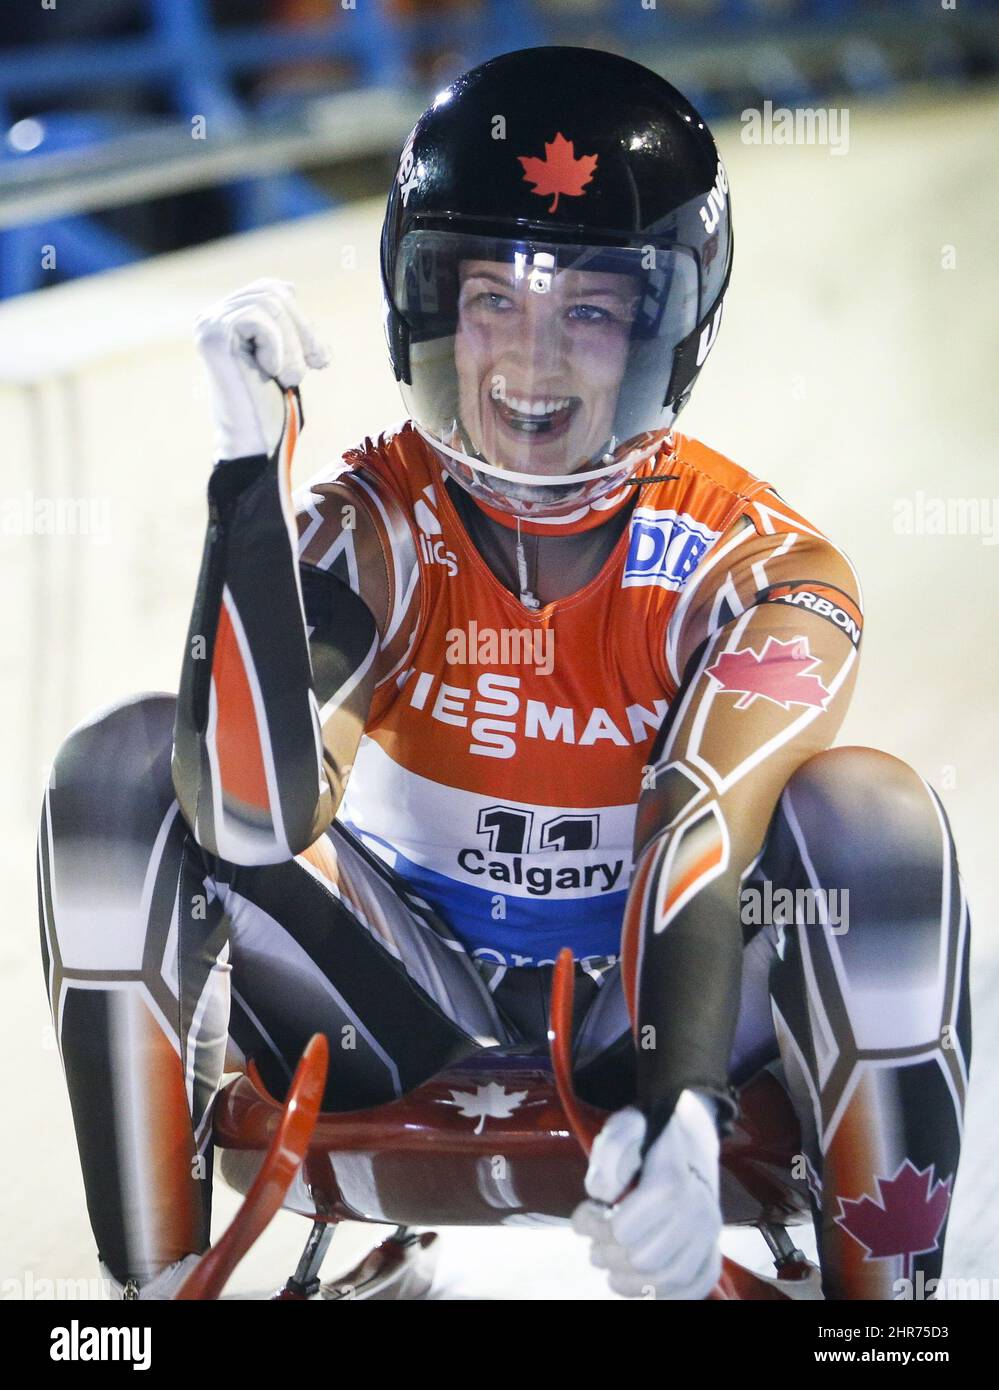 Canada's Arianne Jones, celebrates her third place finish at the women's World Cup luge event in Calgary, Friday, Dec. 12, 2014.THE CANADIAN PRESS/Jeff McIntosh Stock Photo